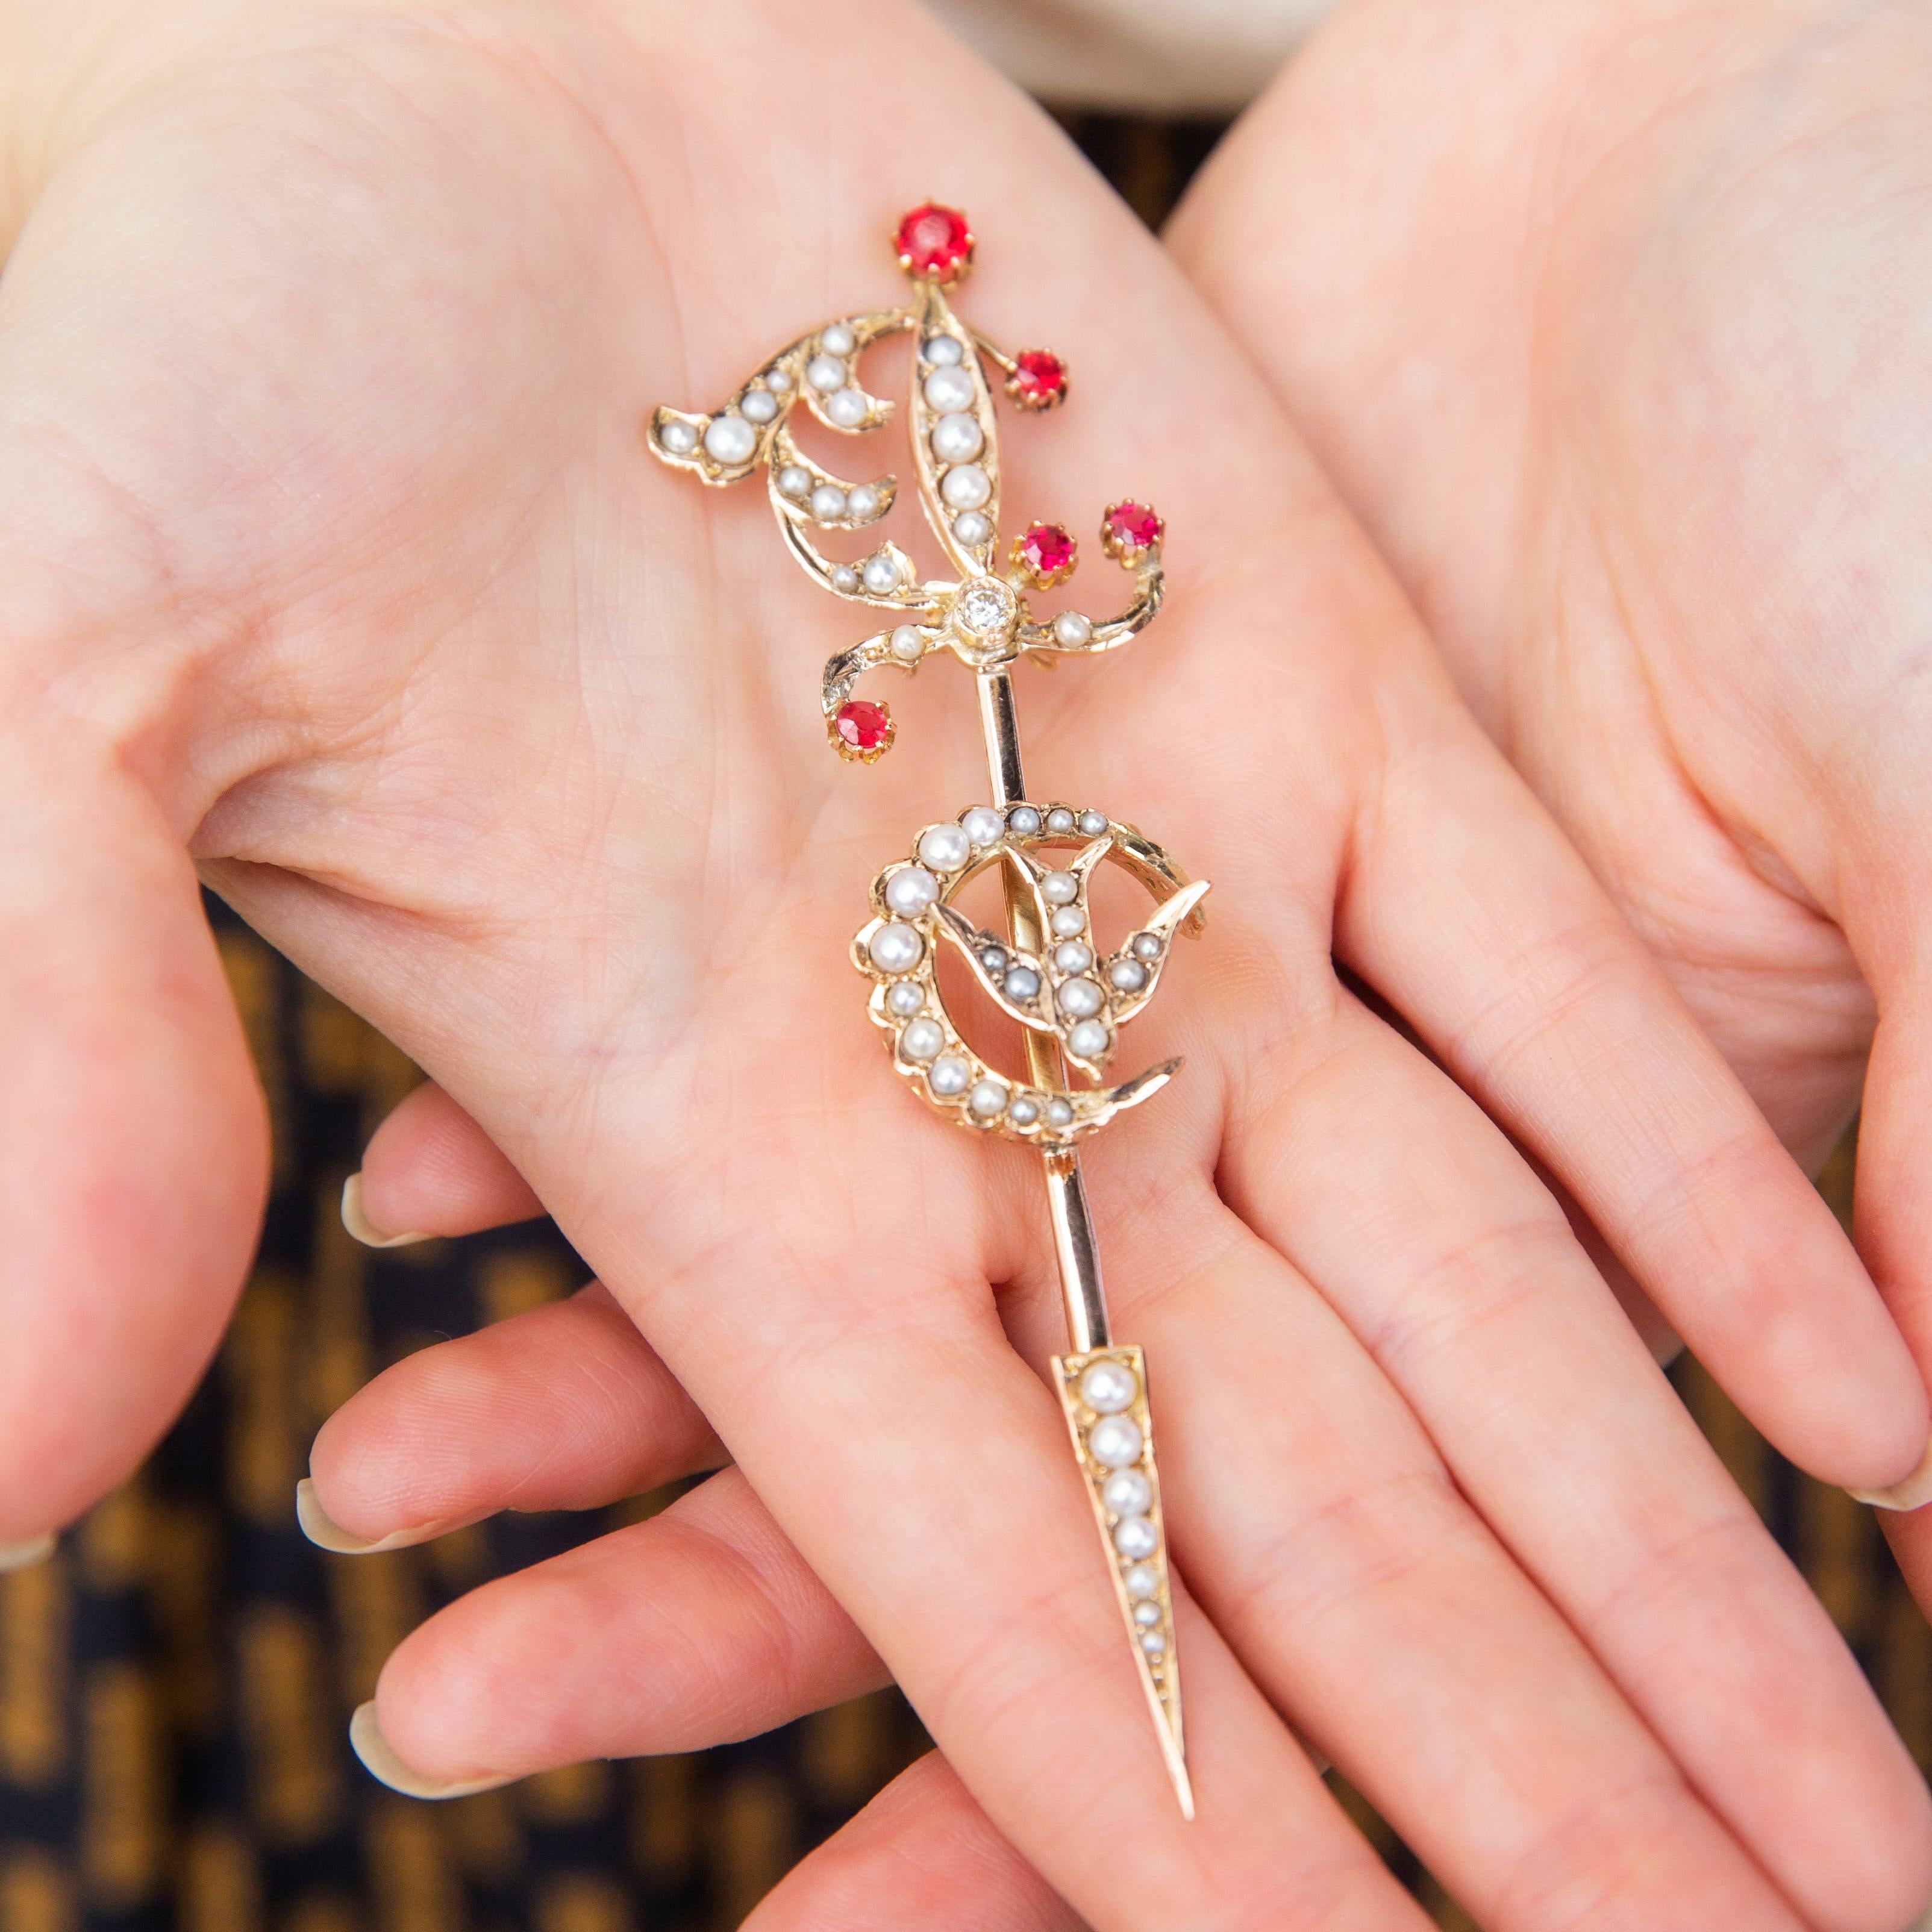 Steeped in Edwardian history, the Mary Brooch is exquisite. Intricately designed, her bold sword, crescent moon and soaring swallow are splendidly crafted in 9 carat gold. Crimson rubies and lavish seed pearls both embellish and soften the lines and